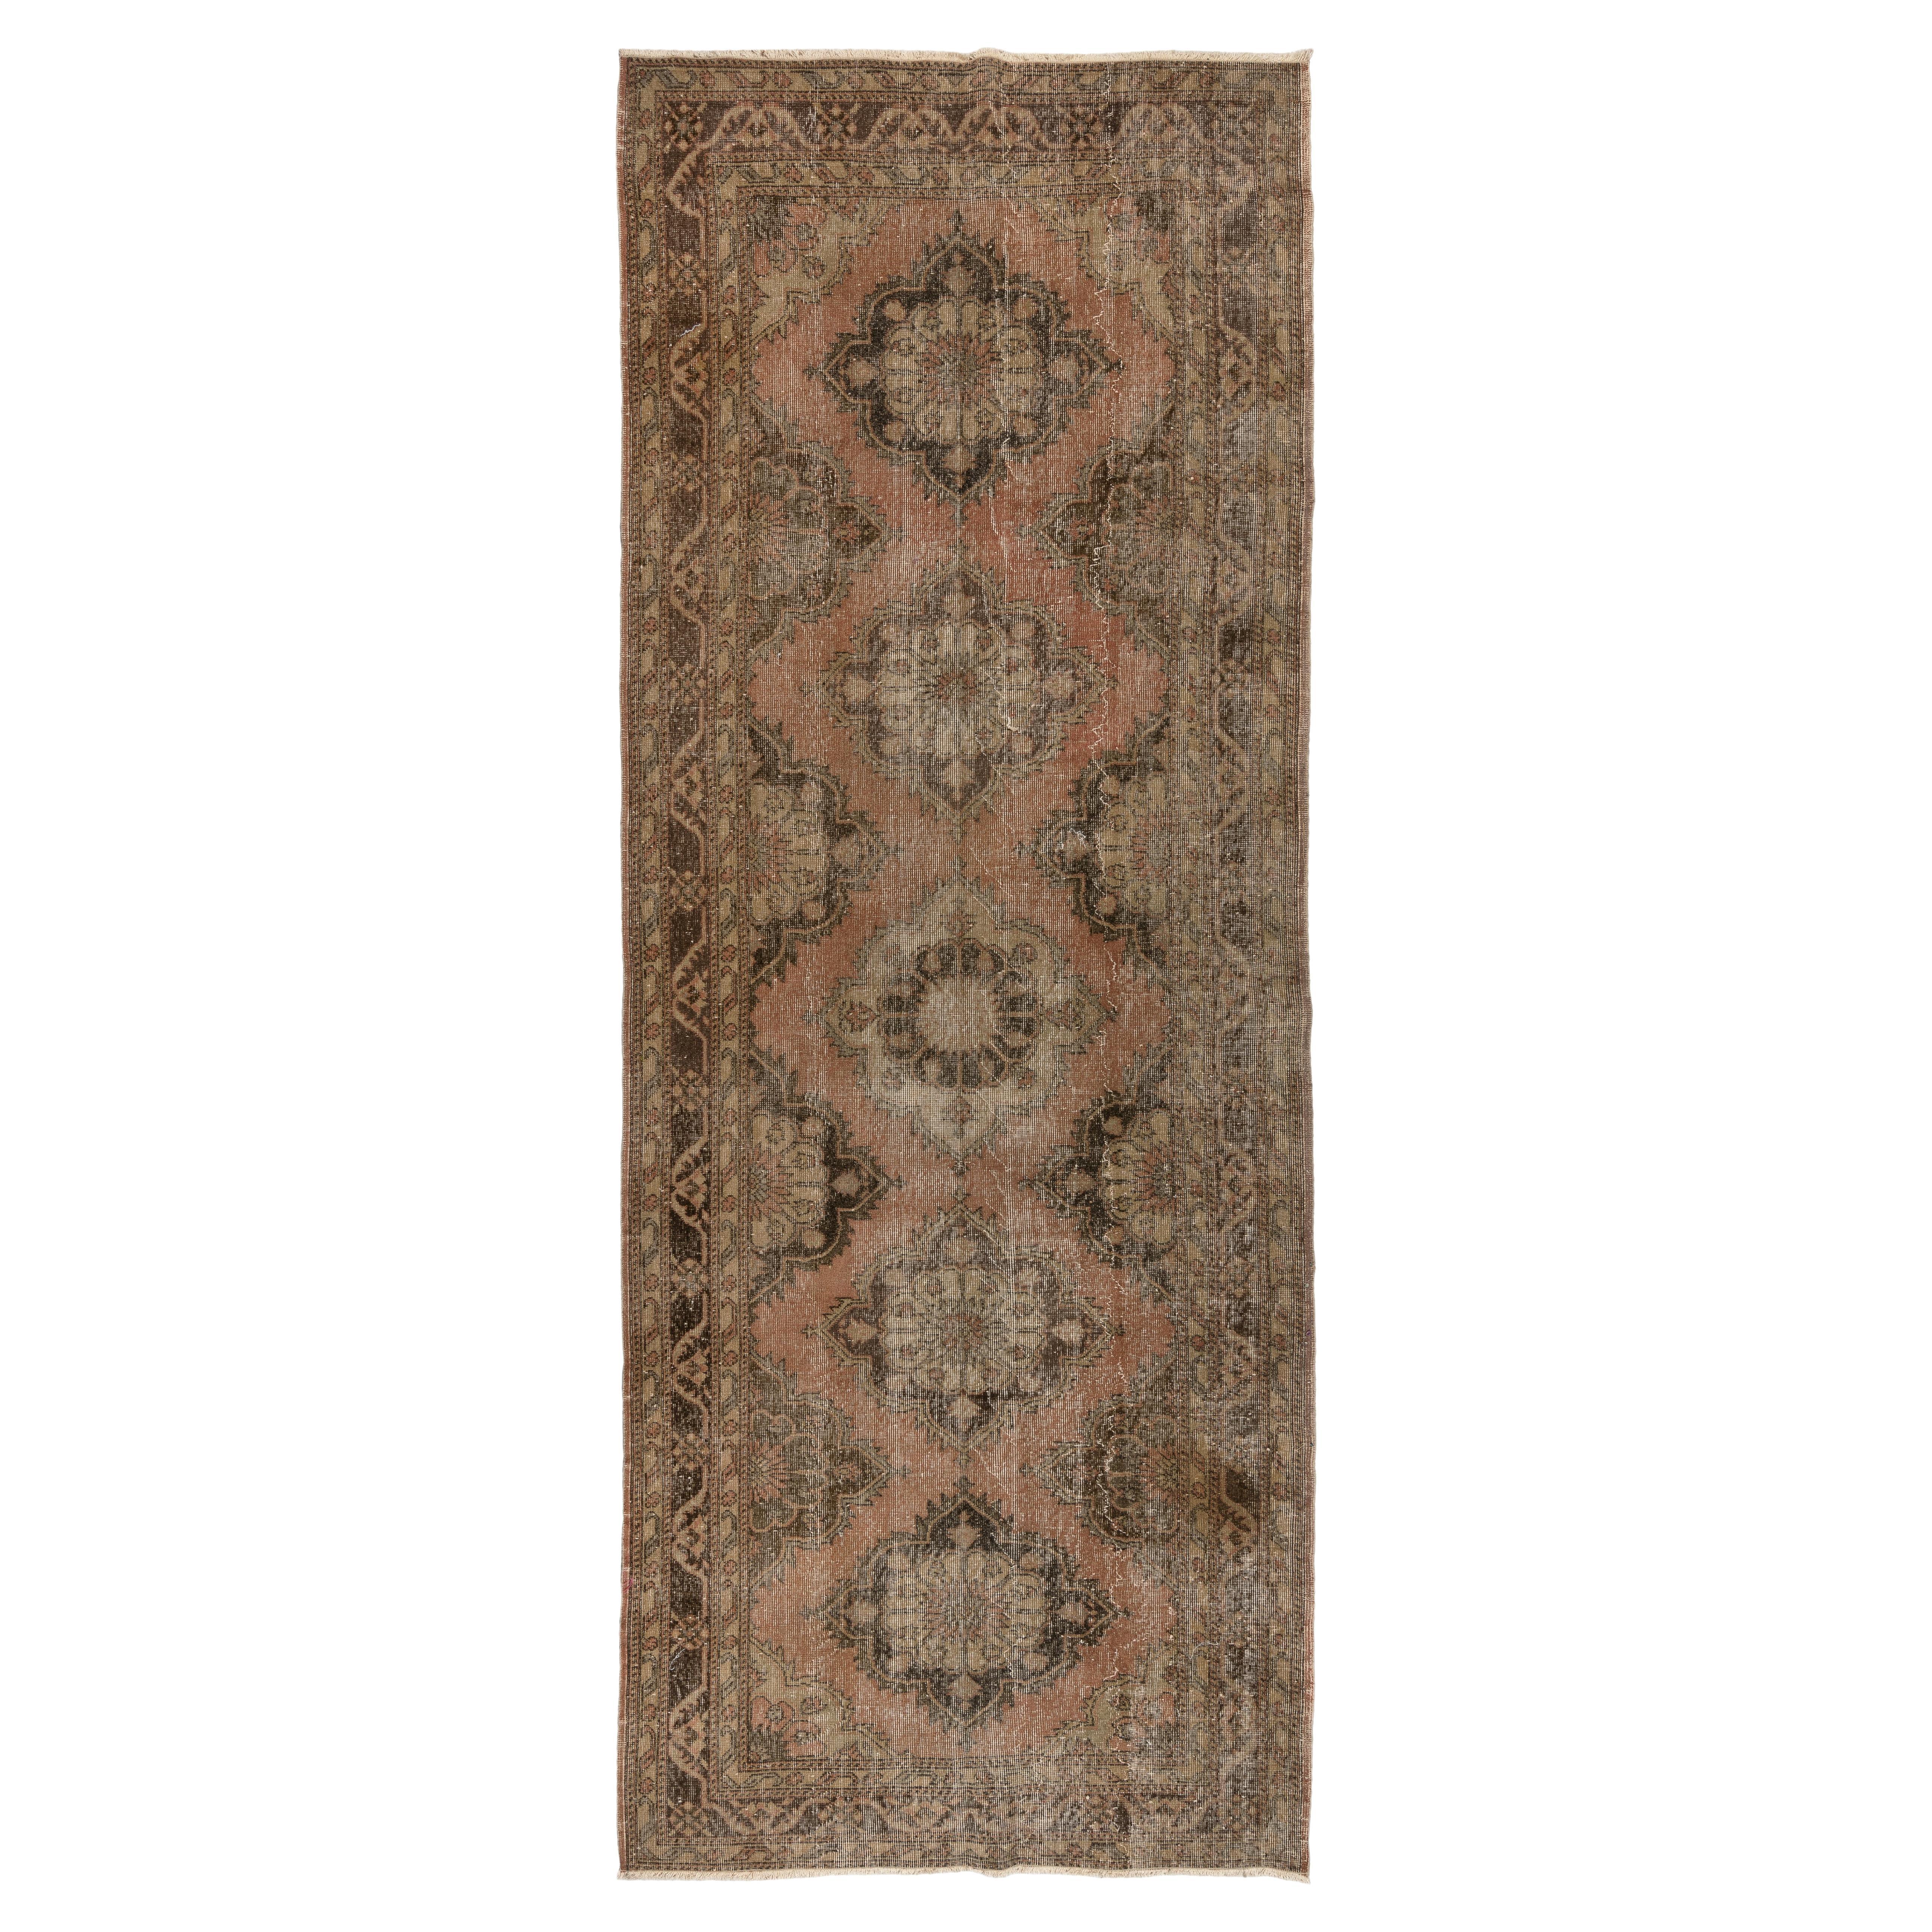 4.8x12.8 ft 1960s Handmade Wool Runner with Medallion Design in Earthy Colors For Sale